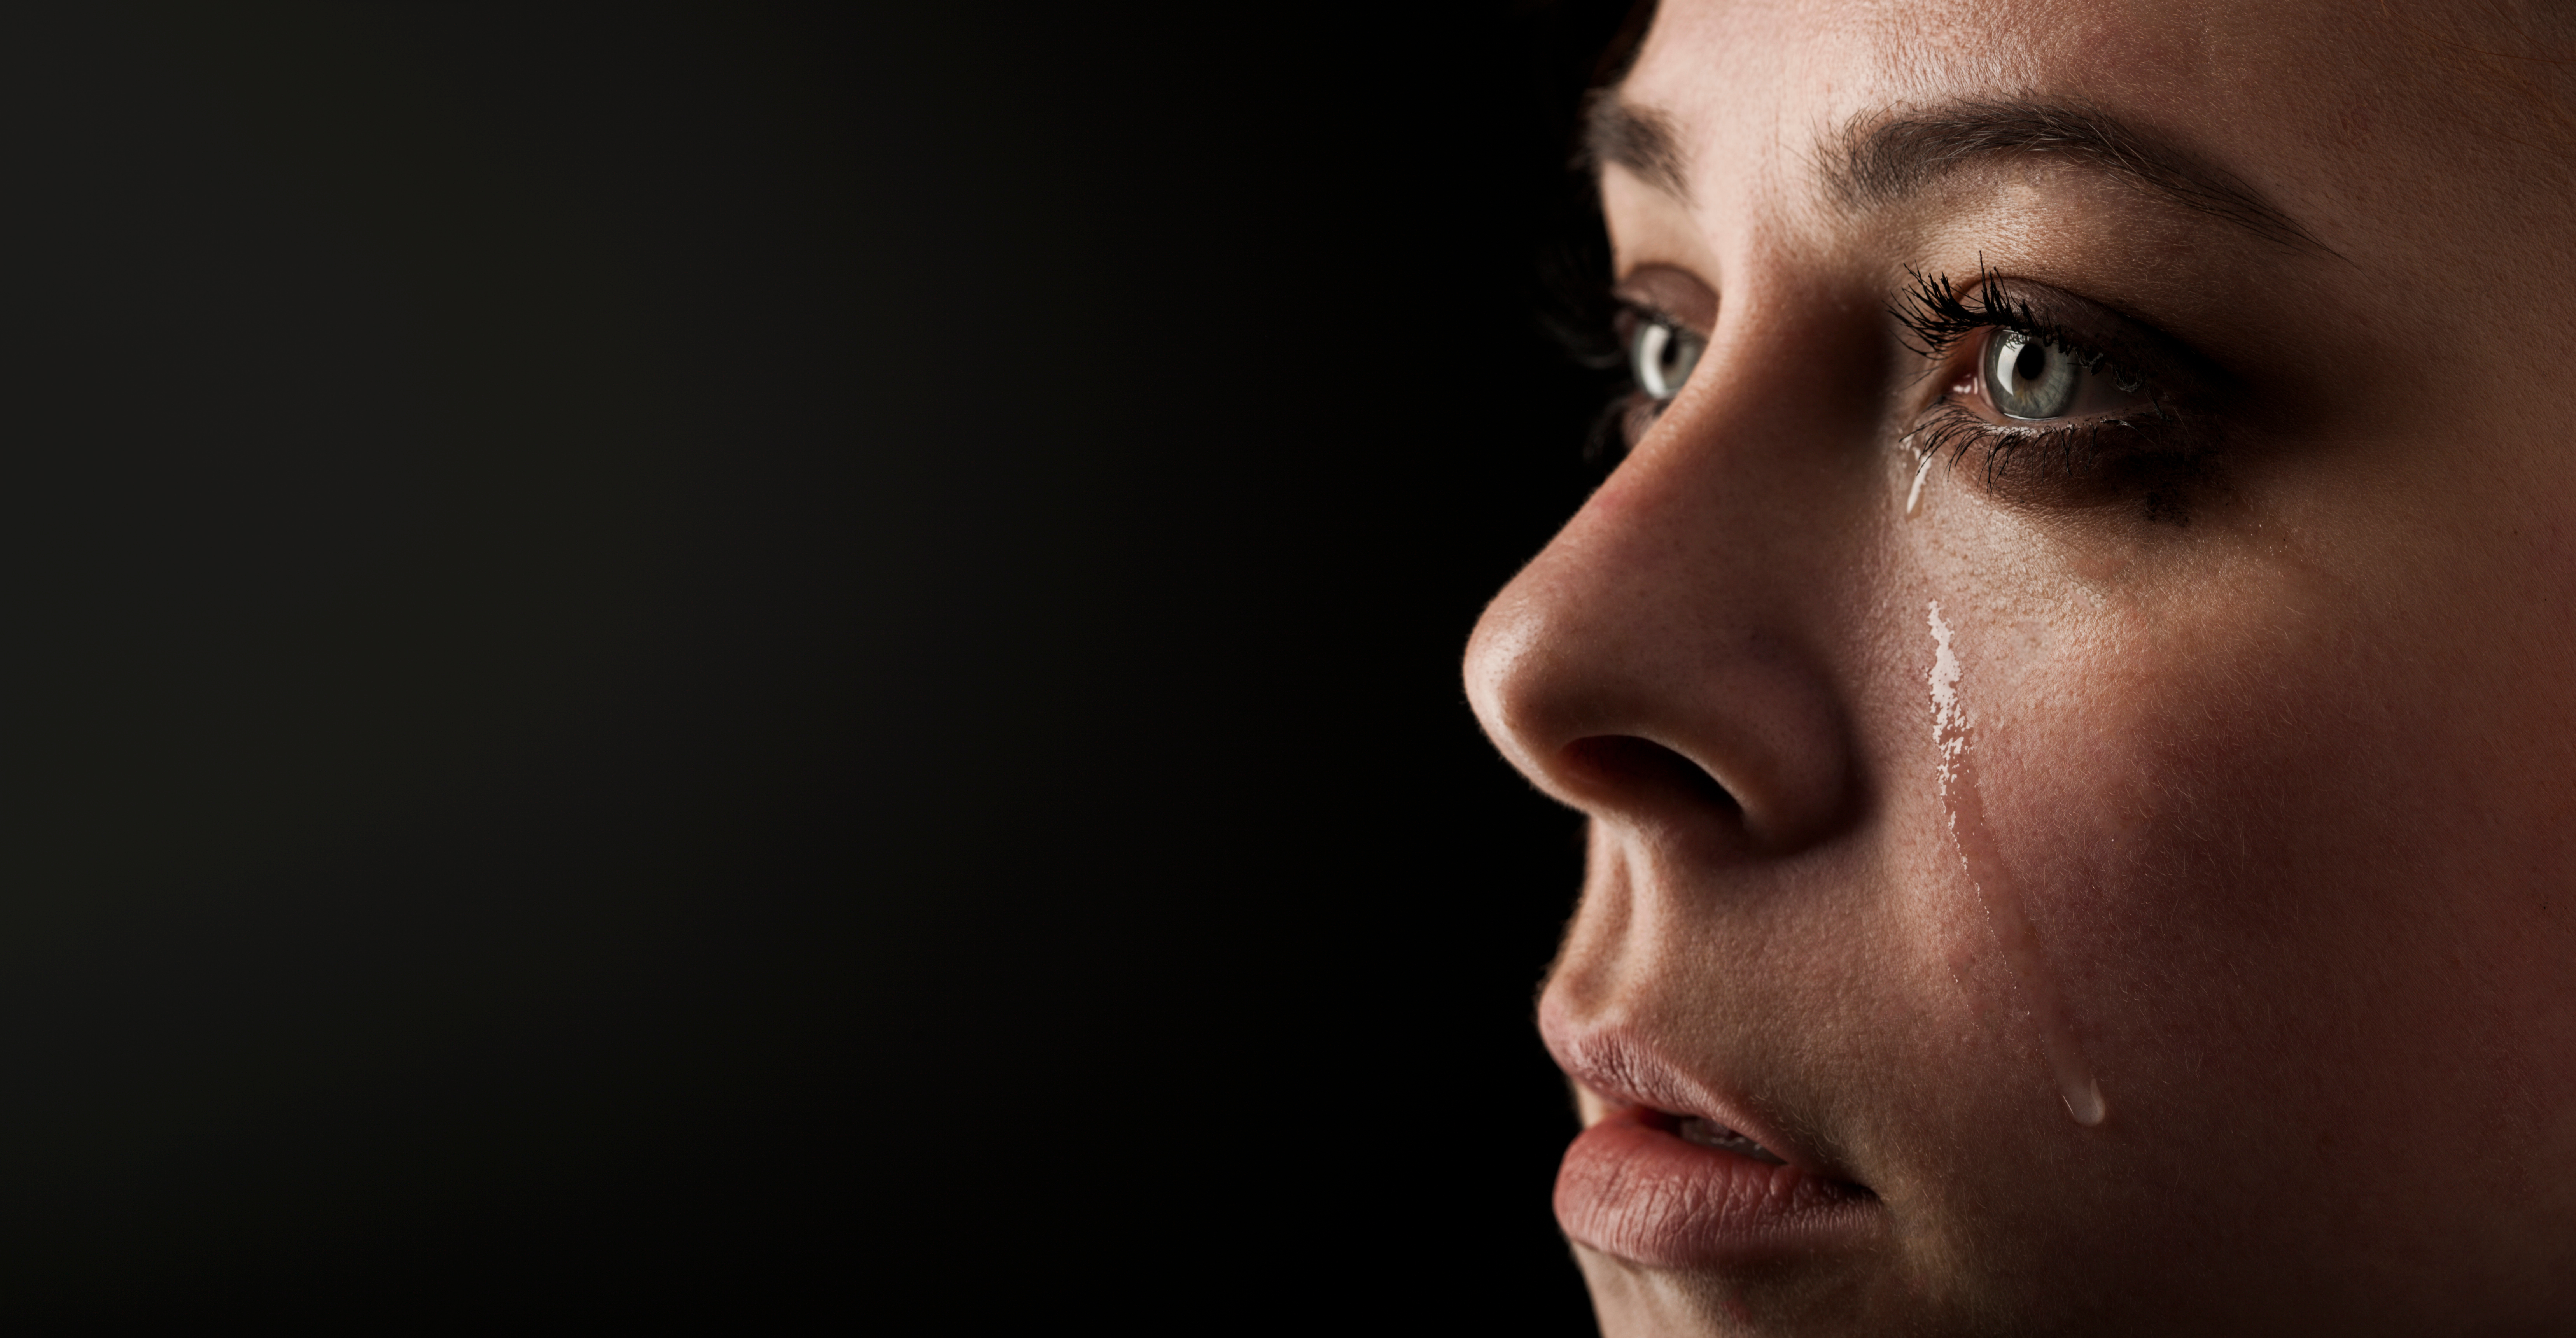 Woman cry on black background. | Source: Shutterstock